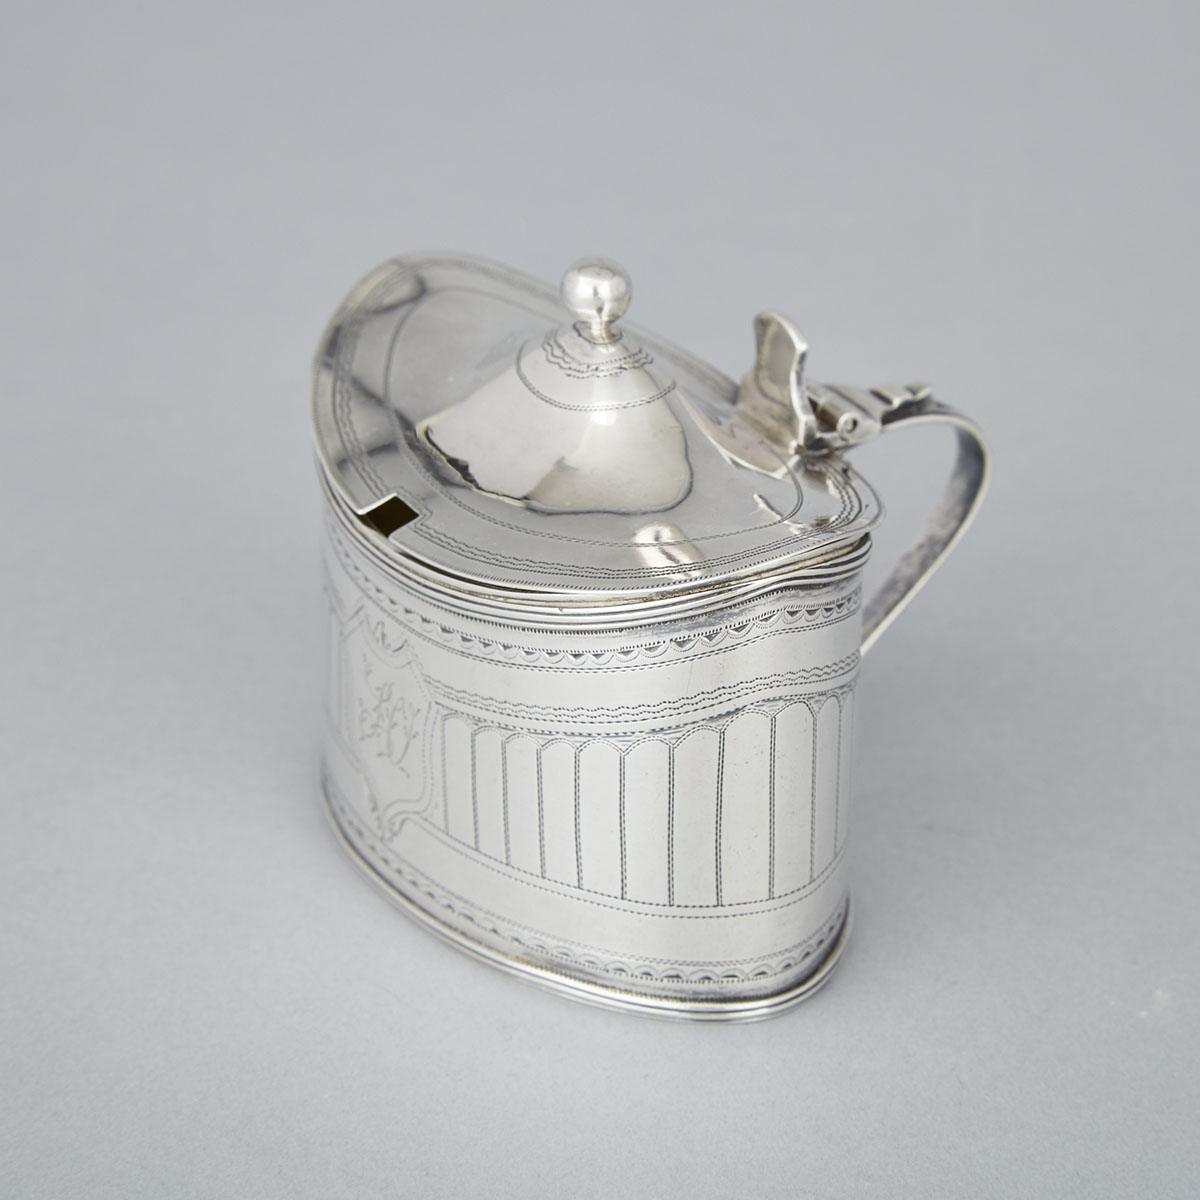 George III Silver Mustard Pot, Alexander Field, London, 1797, reworked by Paul Morin, Quebec City, Que., c.1800-15